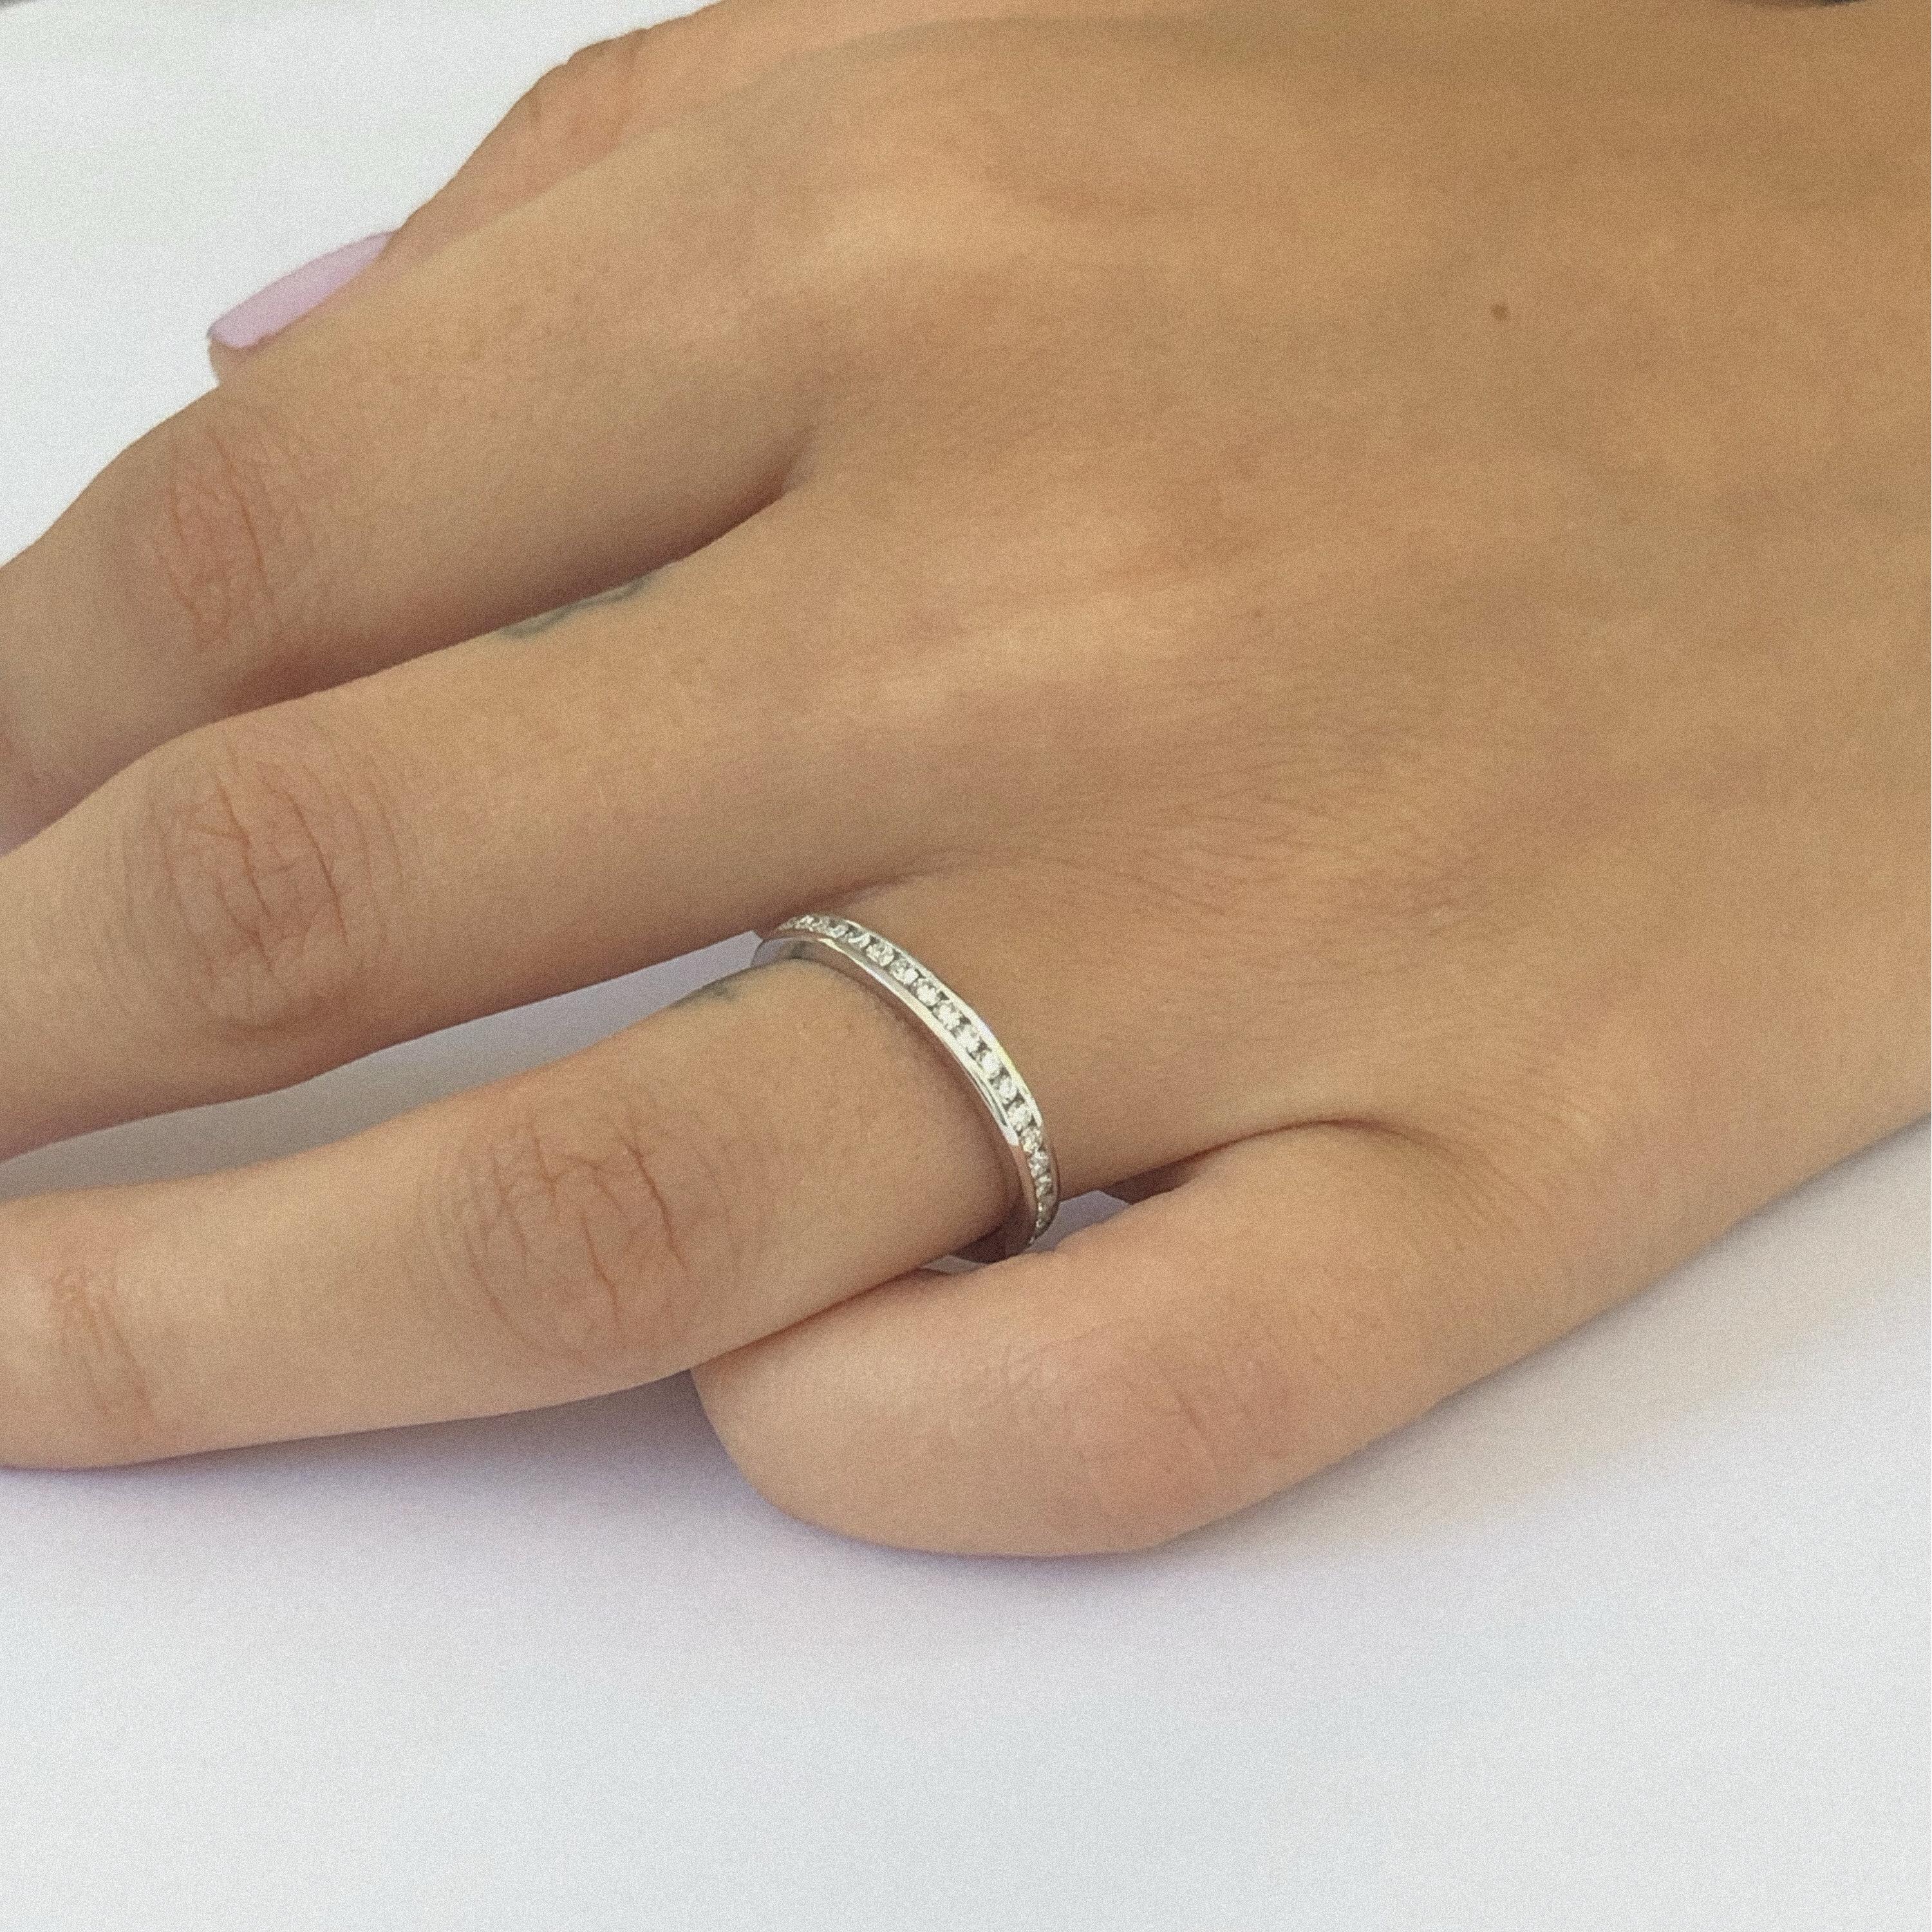 Platinum channel set 2.5 millimeter diamond wedding band or stacking ring
Diamond weight 0.60
Diamond quality G VS
Our team of graduate gemologists carefully hand-select every diamond and sapphire . 
Ring size 6 
Ring cannot be sized
